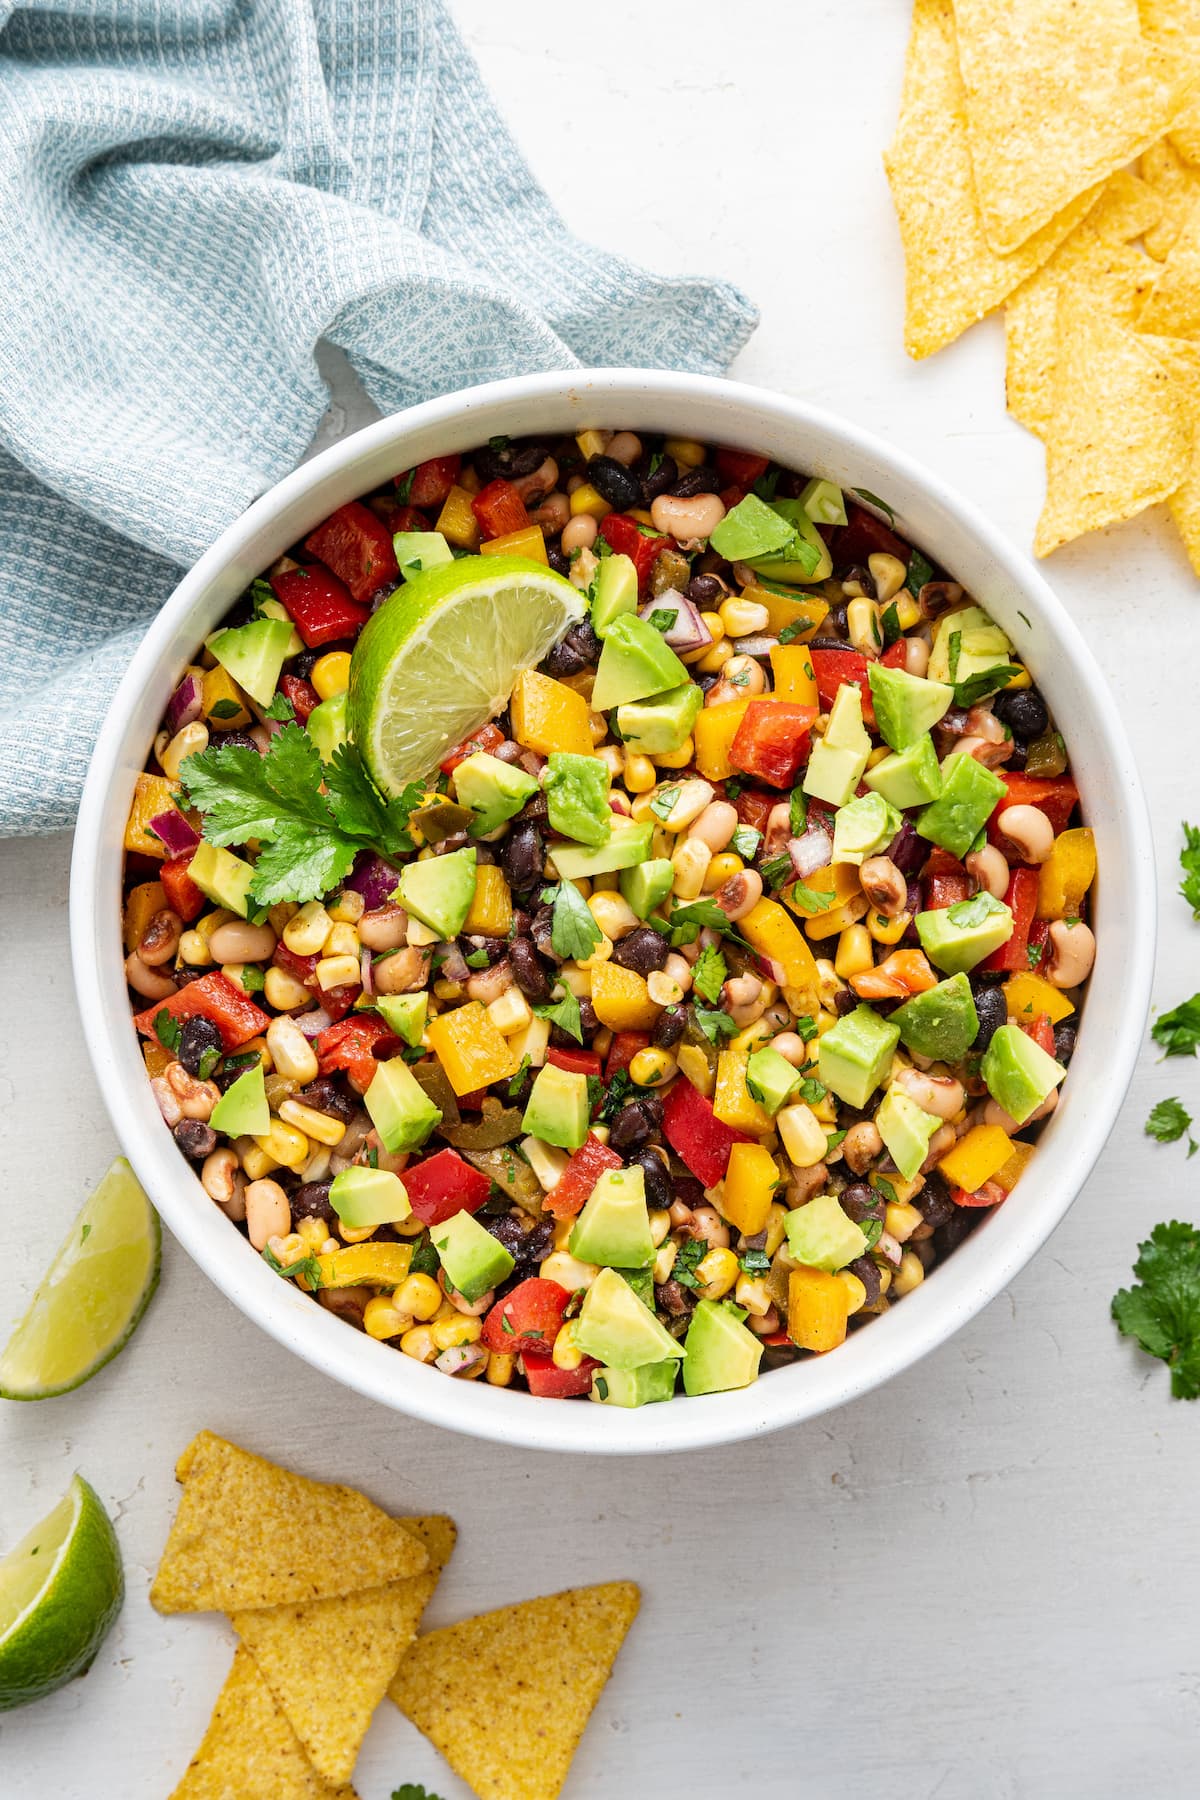 Cowboy caviar in a white bowl with diced avocado, a lime wedge, and tortilla chips on the side.